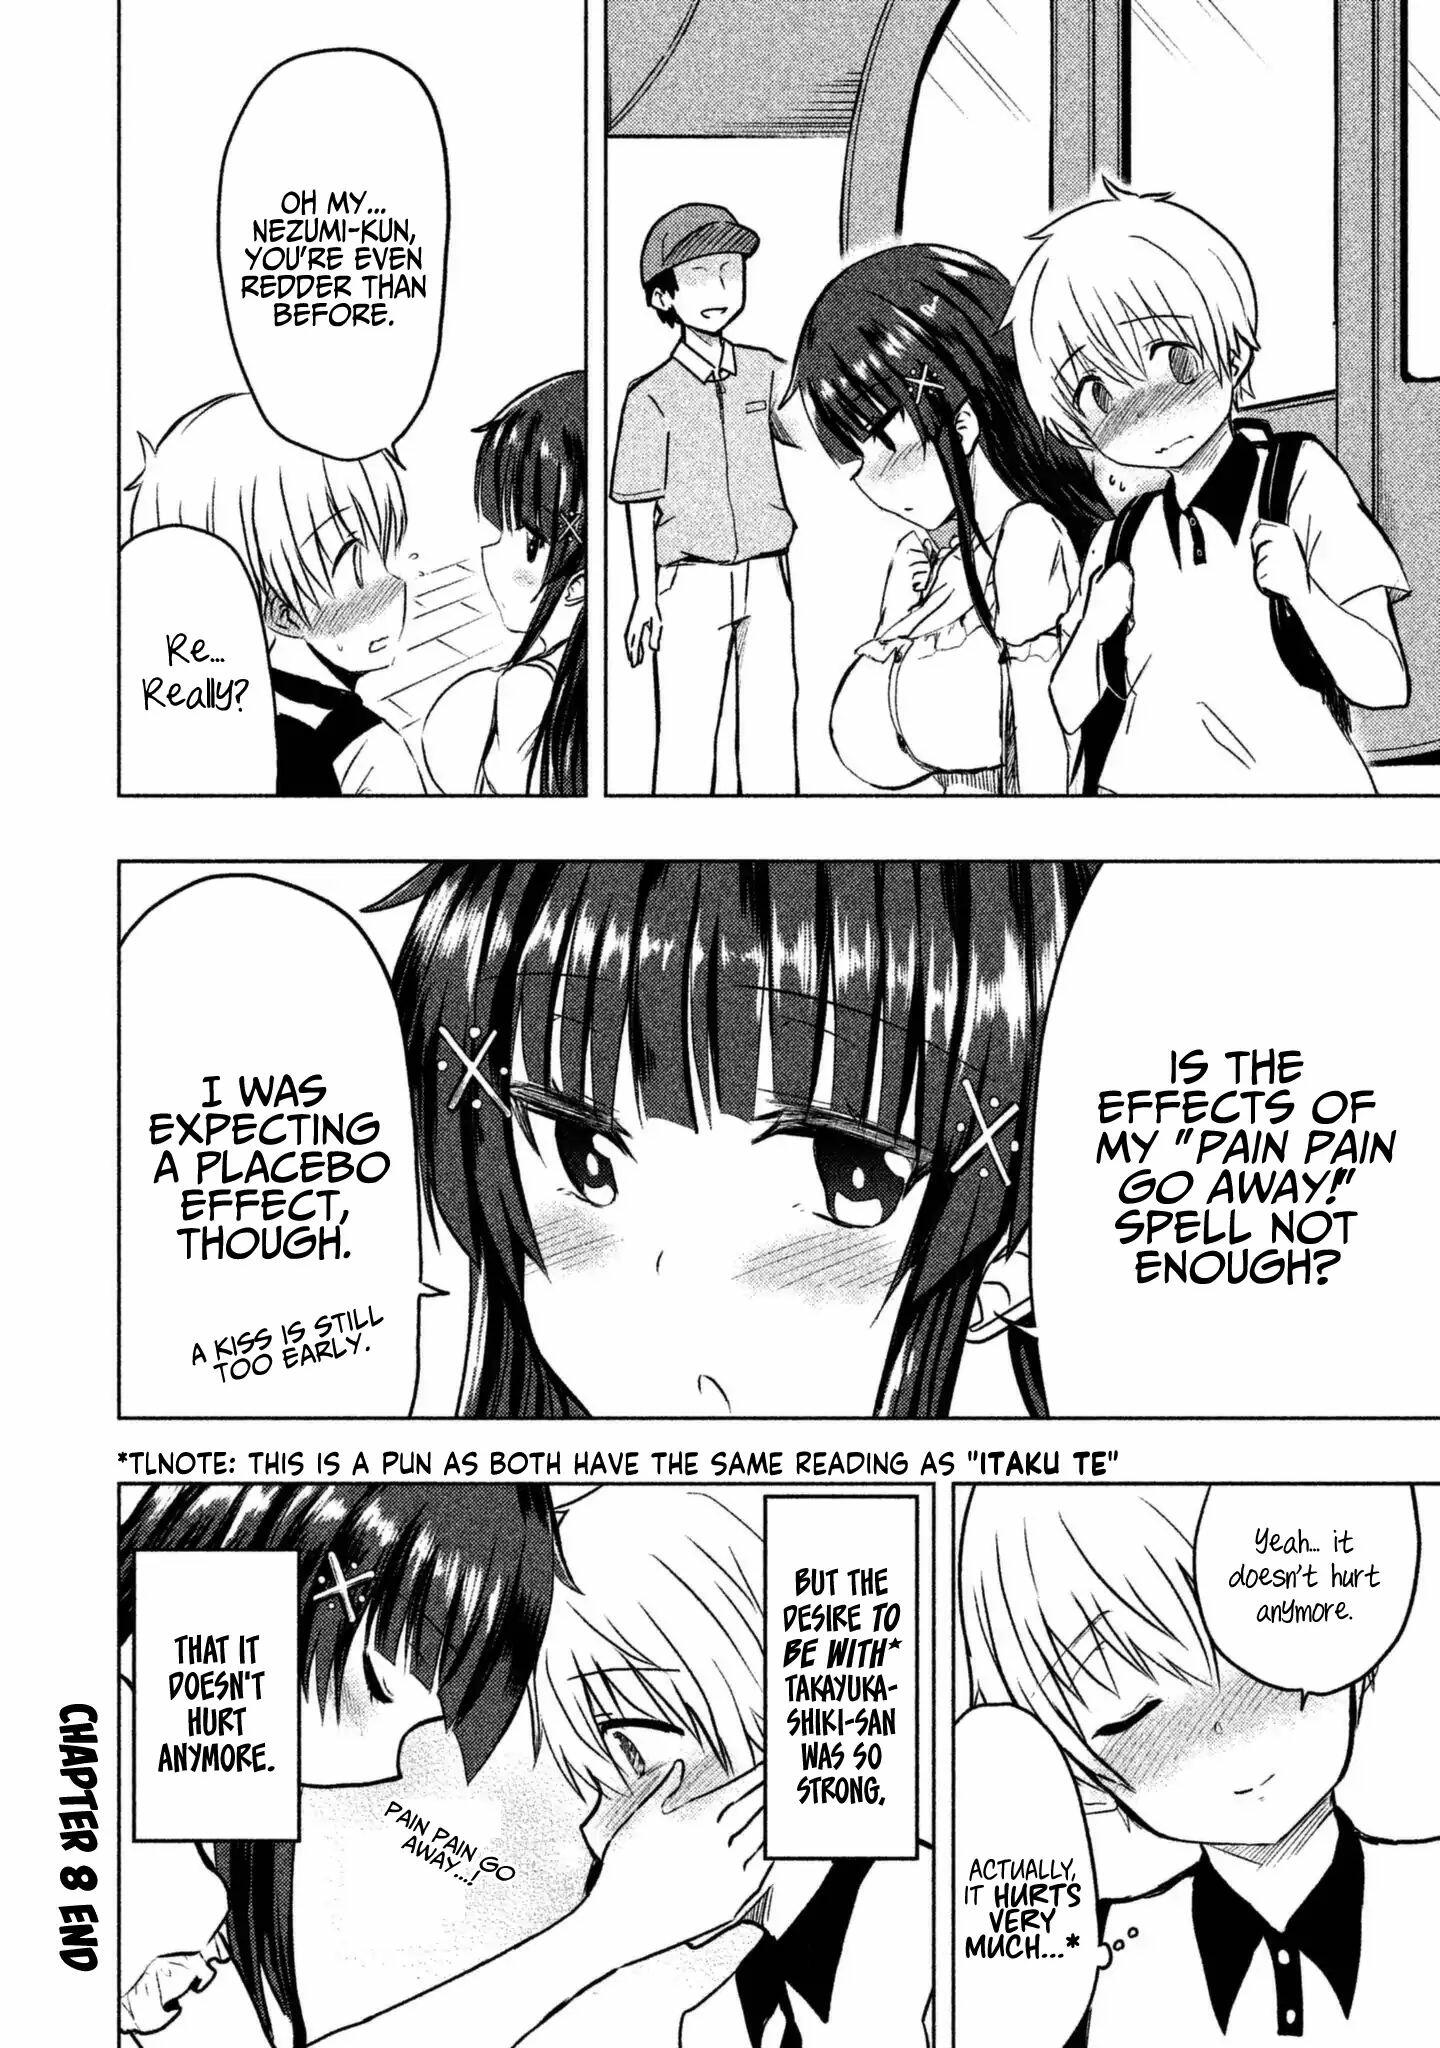 A Girl Who Is Very Well-Informed About Weird Knowledge, Takayukashiki Souko-San Vol.1 Chapter 8: Distance page 9 - Mangakakalots.com